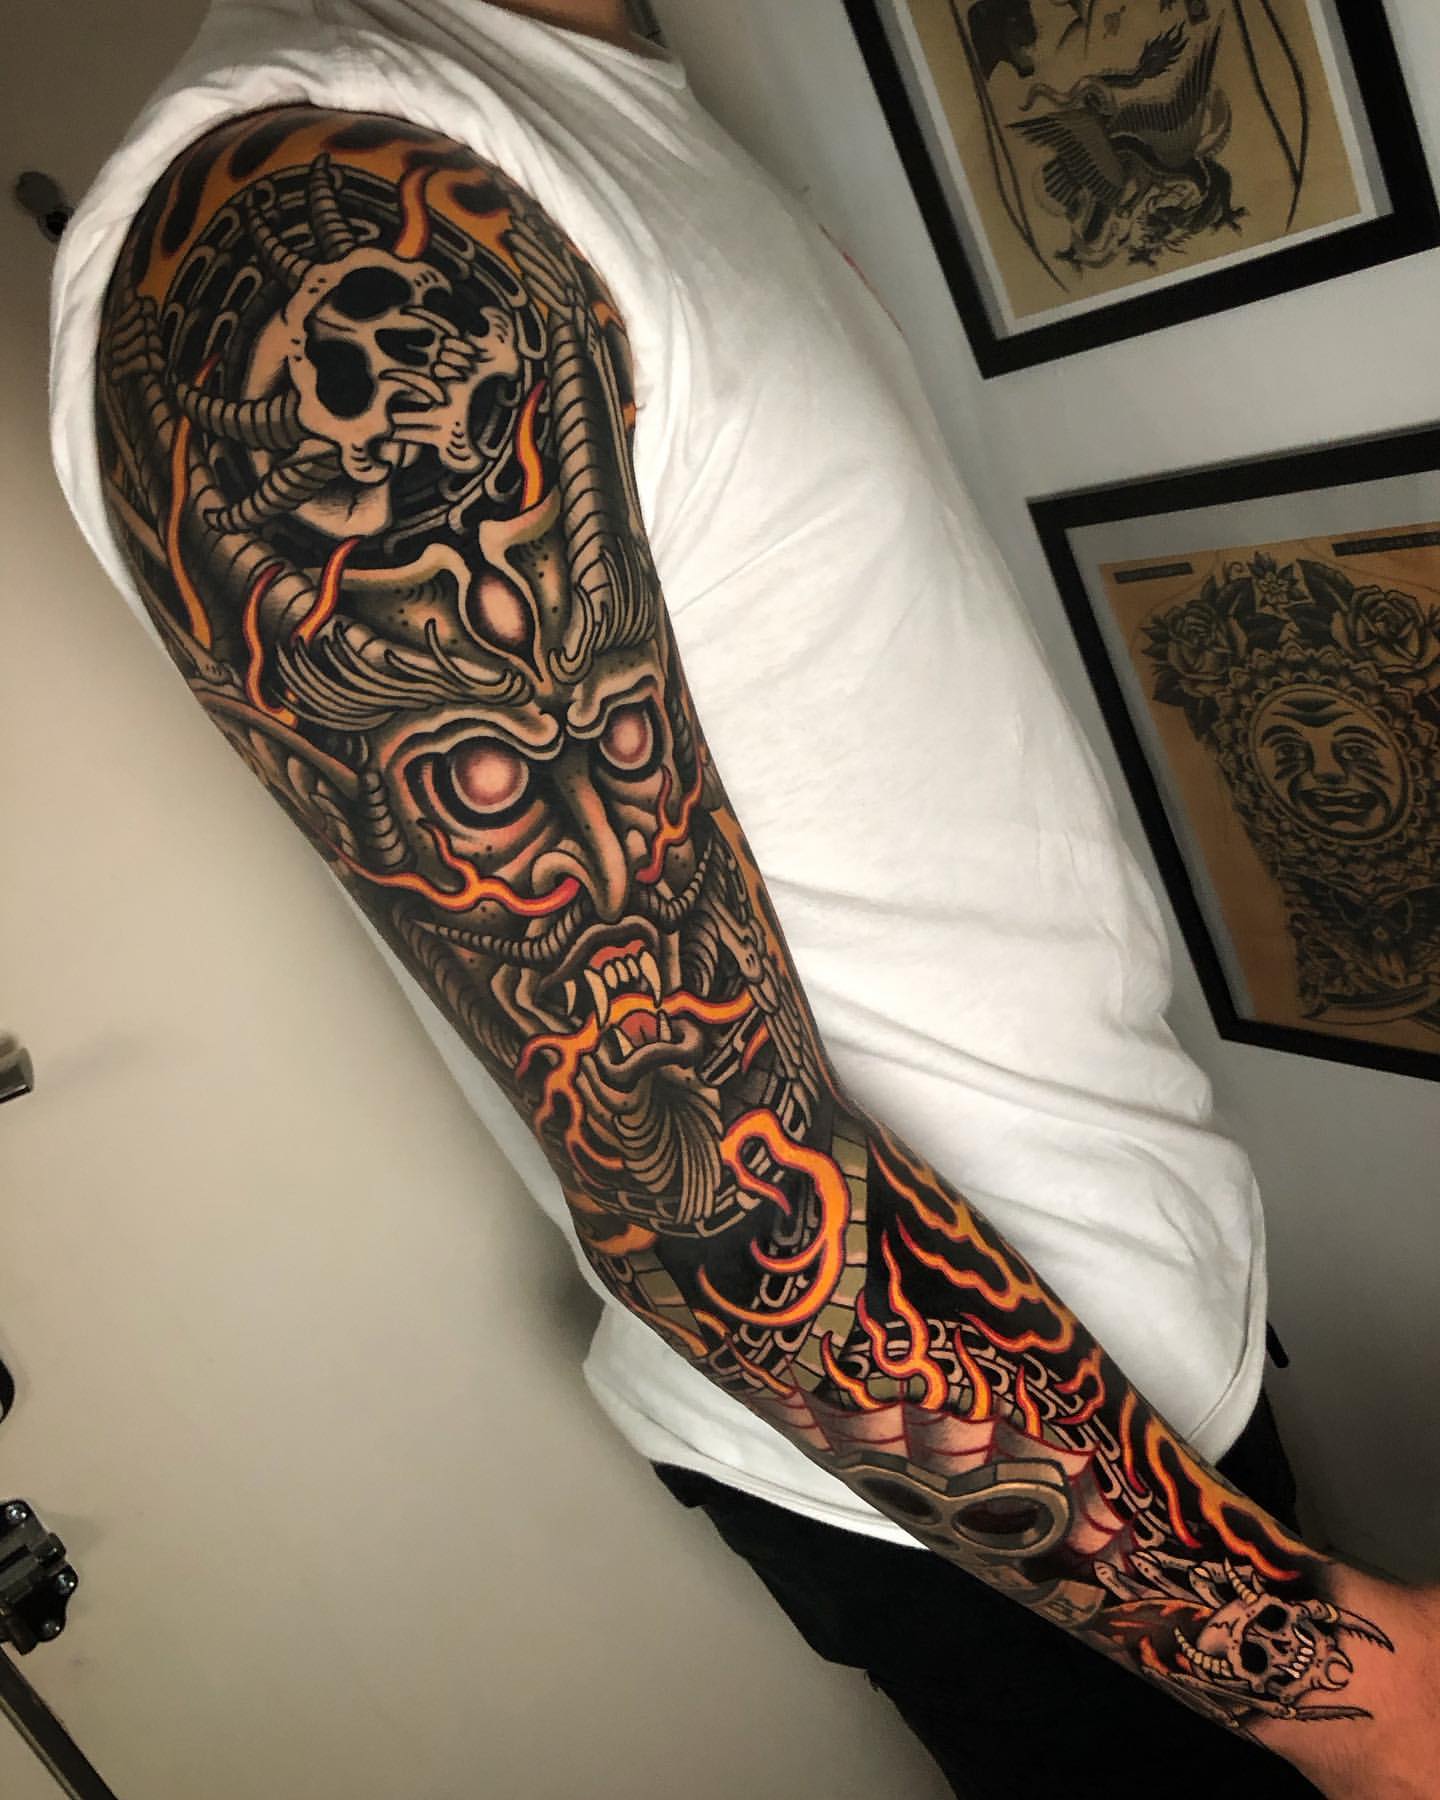 What's the best tattoo design you have ever seen? - Quora